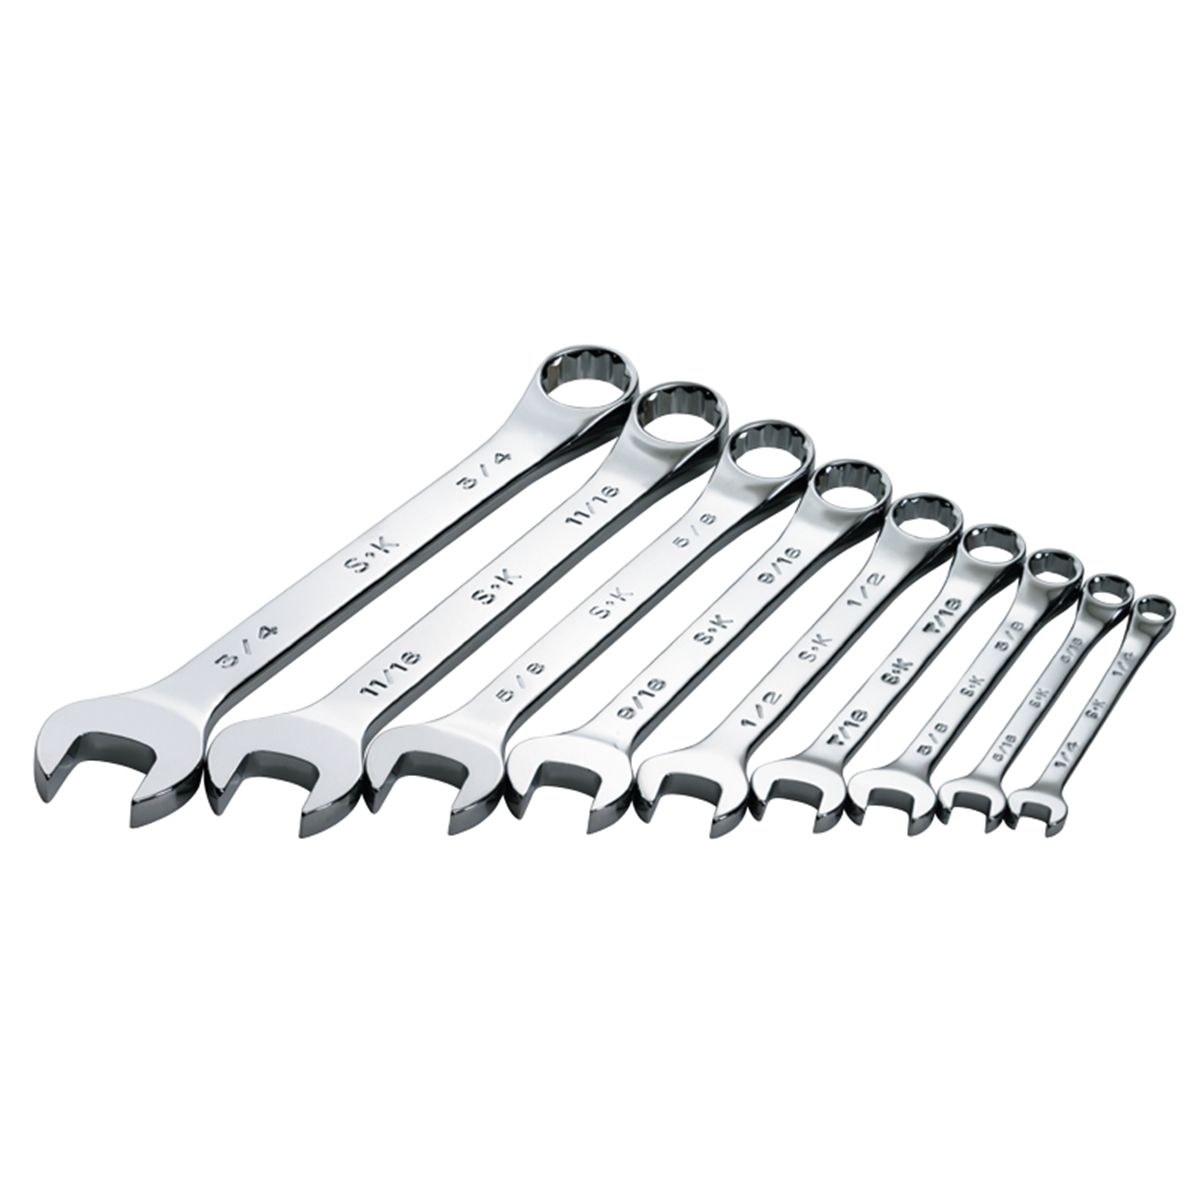 SuperKrome(R) Fractional Combination Wrench Set - 9 Piece